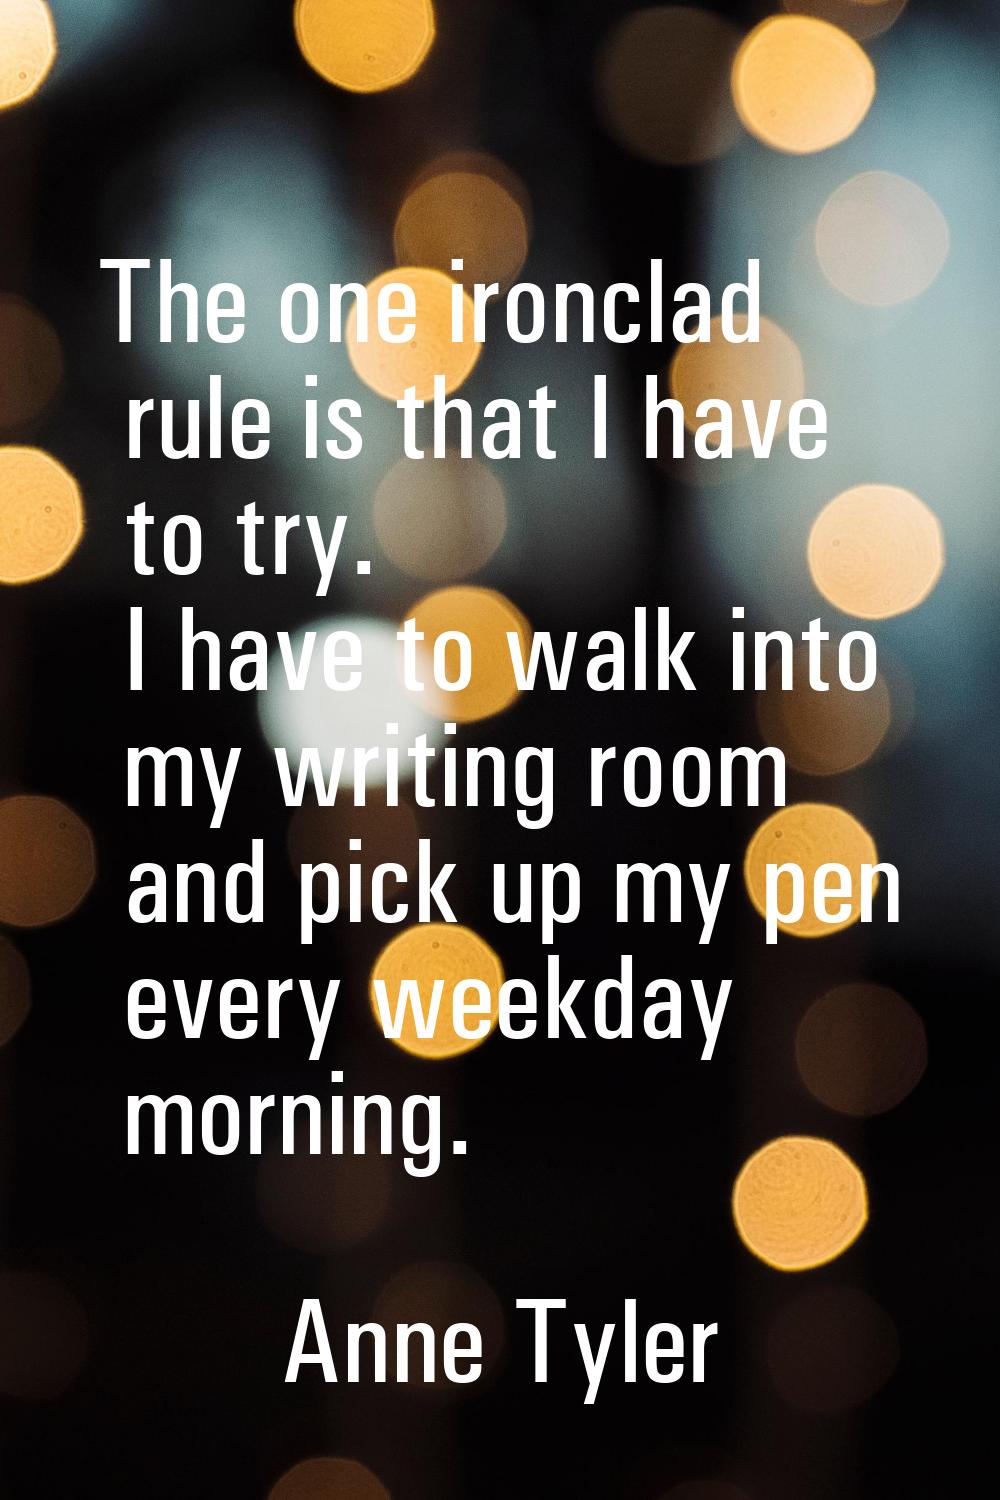 The one ironclad rule is that I have to try. I have to walk into my writing room and pick up my pen